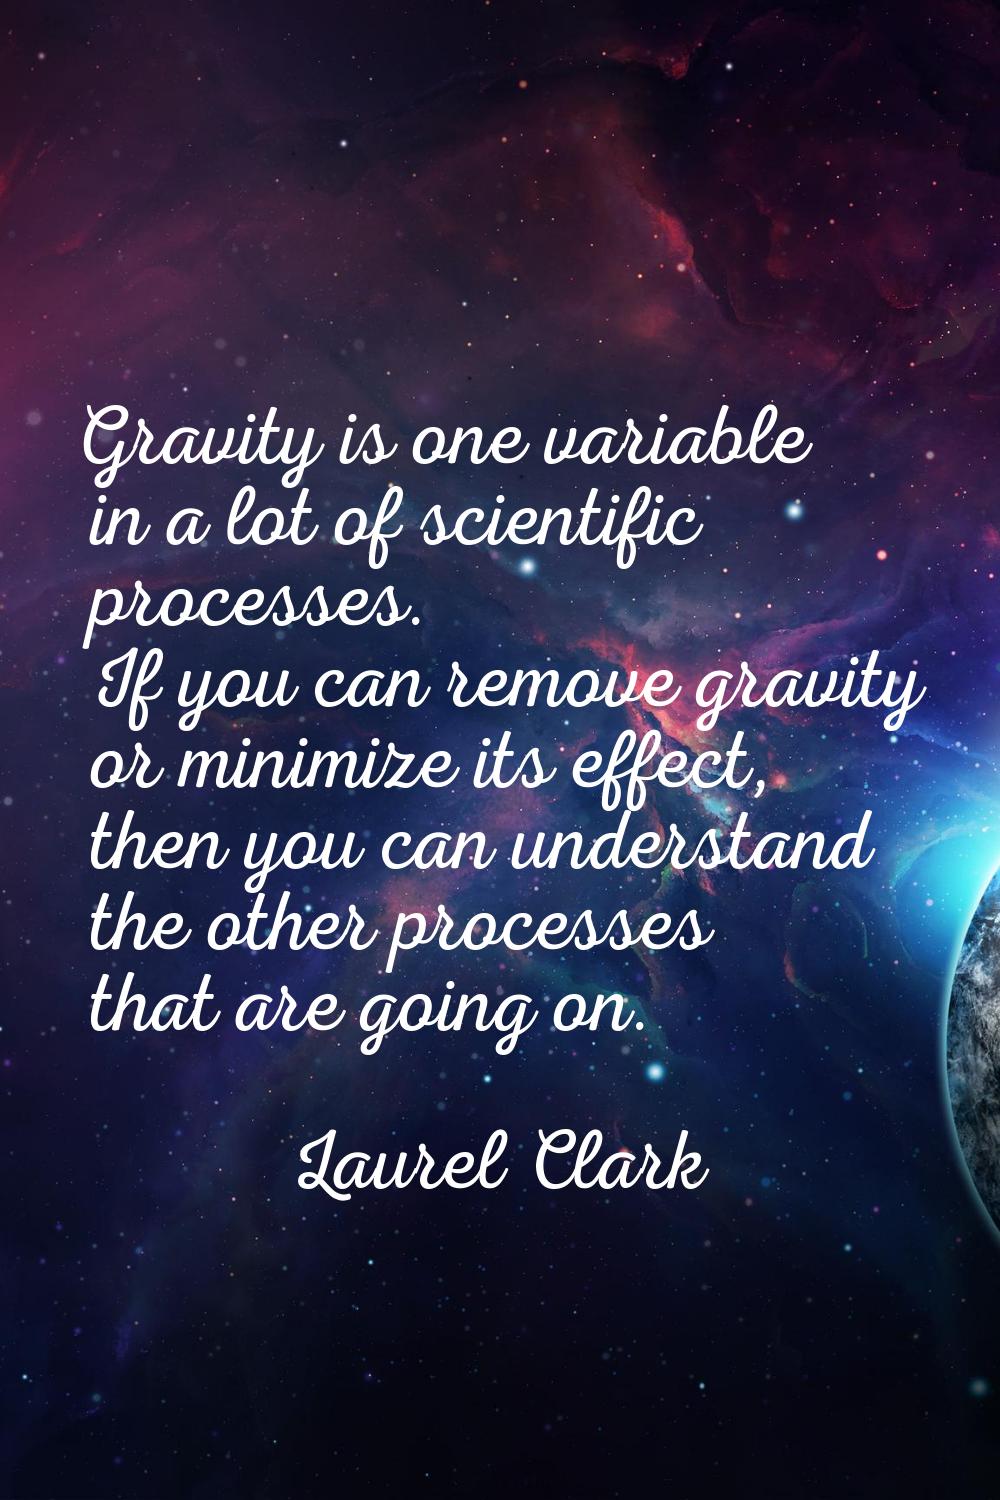 Gravity is one variable in a lot of scientific processes. If you can remove gravity or minimize its